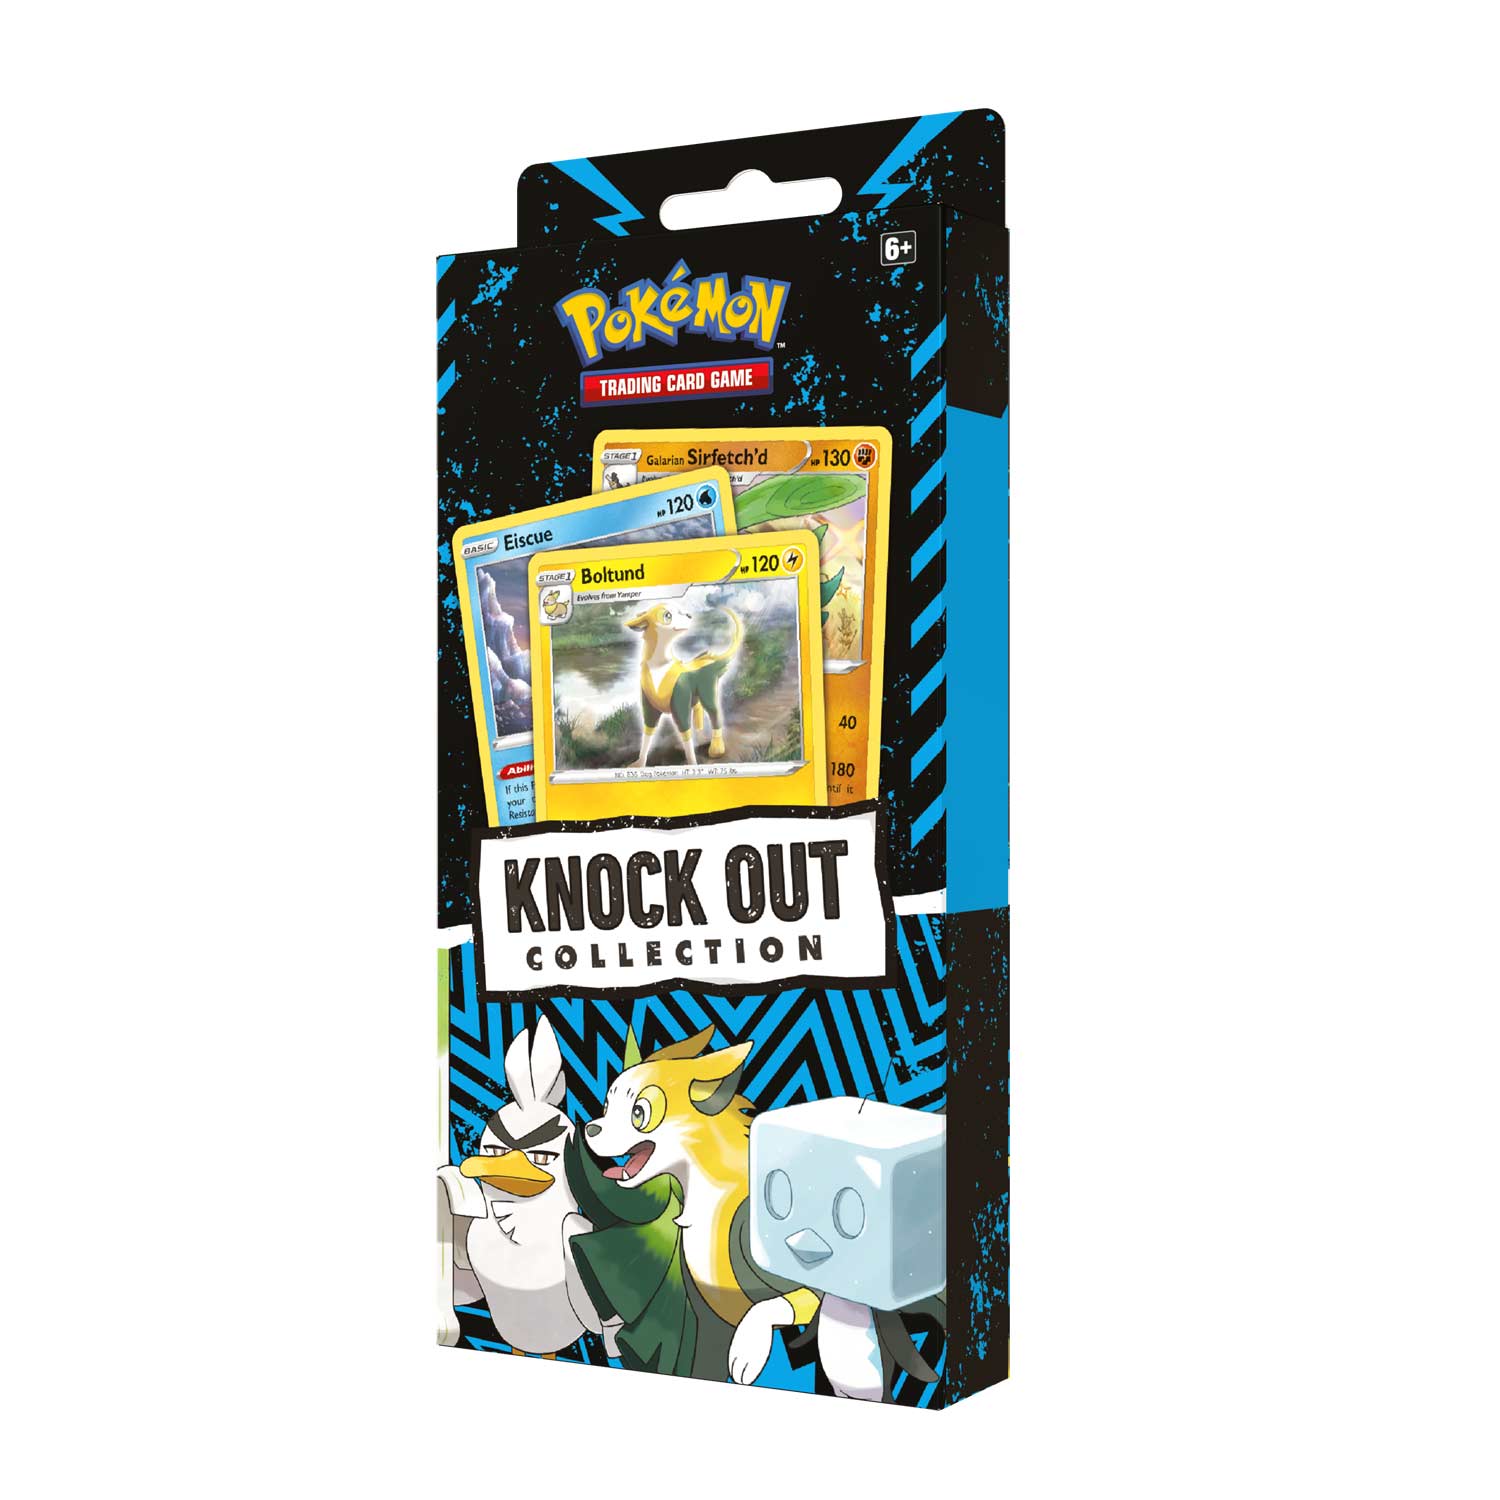 Pokemon-Sword-Shield-Knock-Out-Collection-Boltund-Eiscue-Galarian-Sirfetchd-EN-1